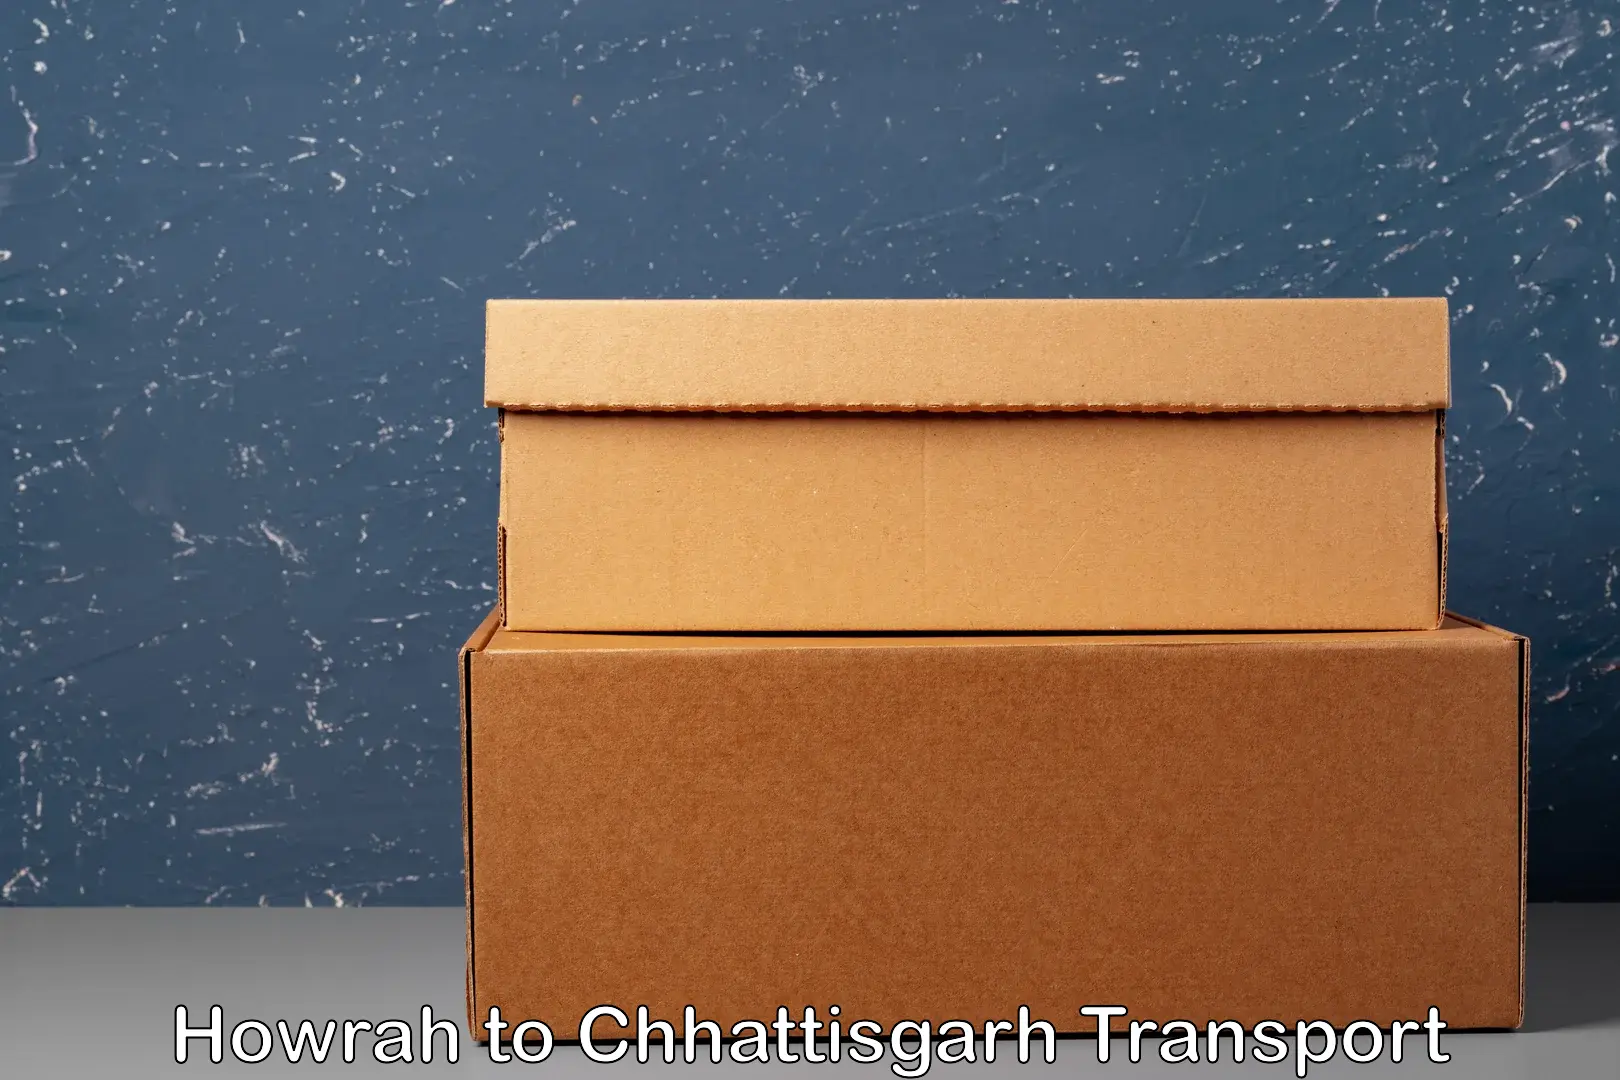 Package delivery services Howrah to Raigarh